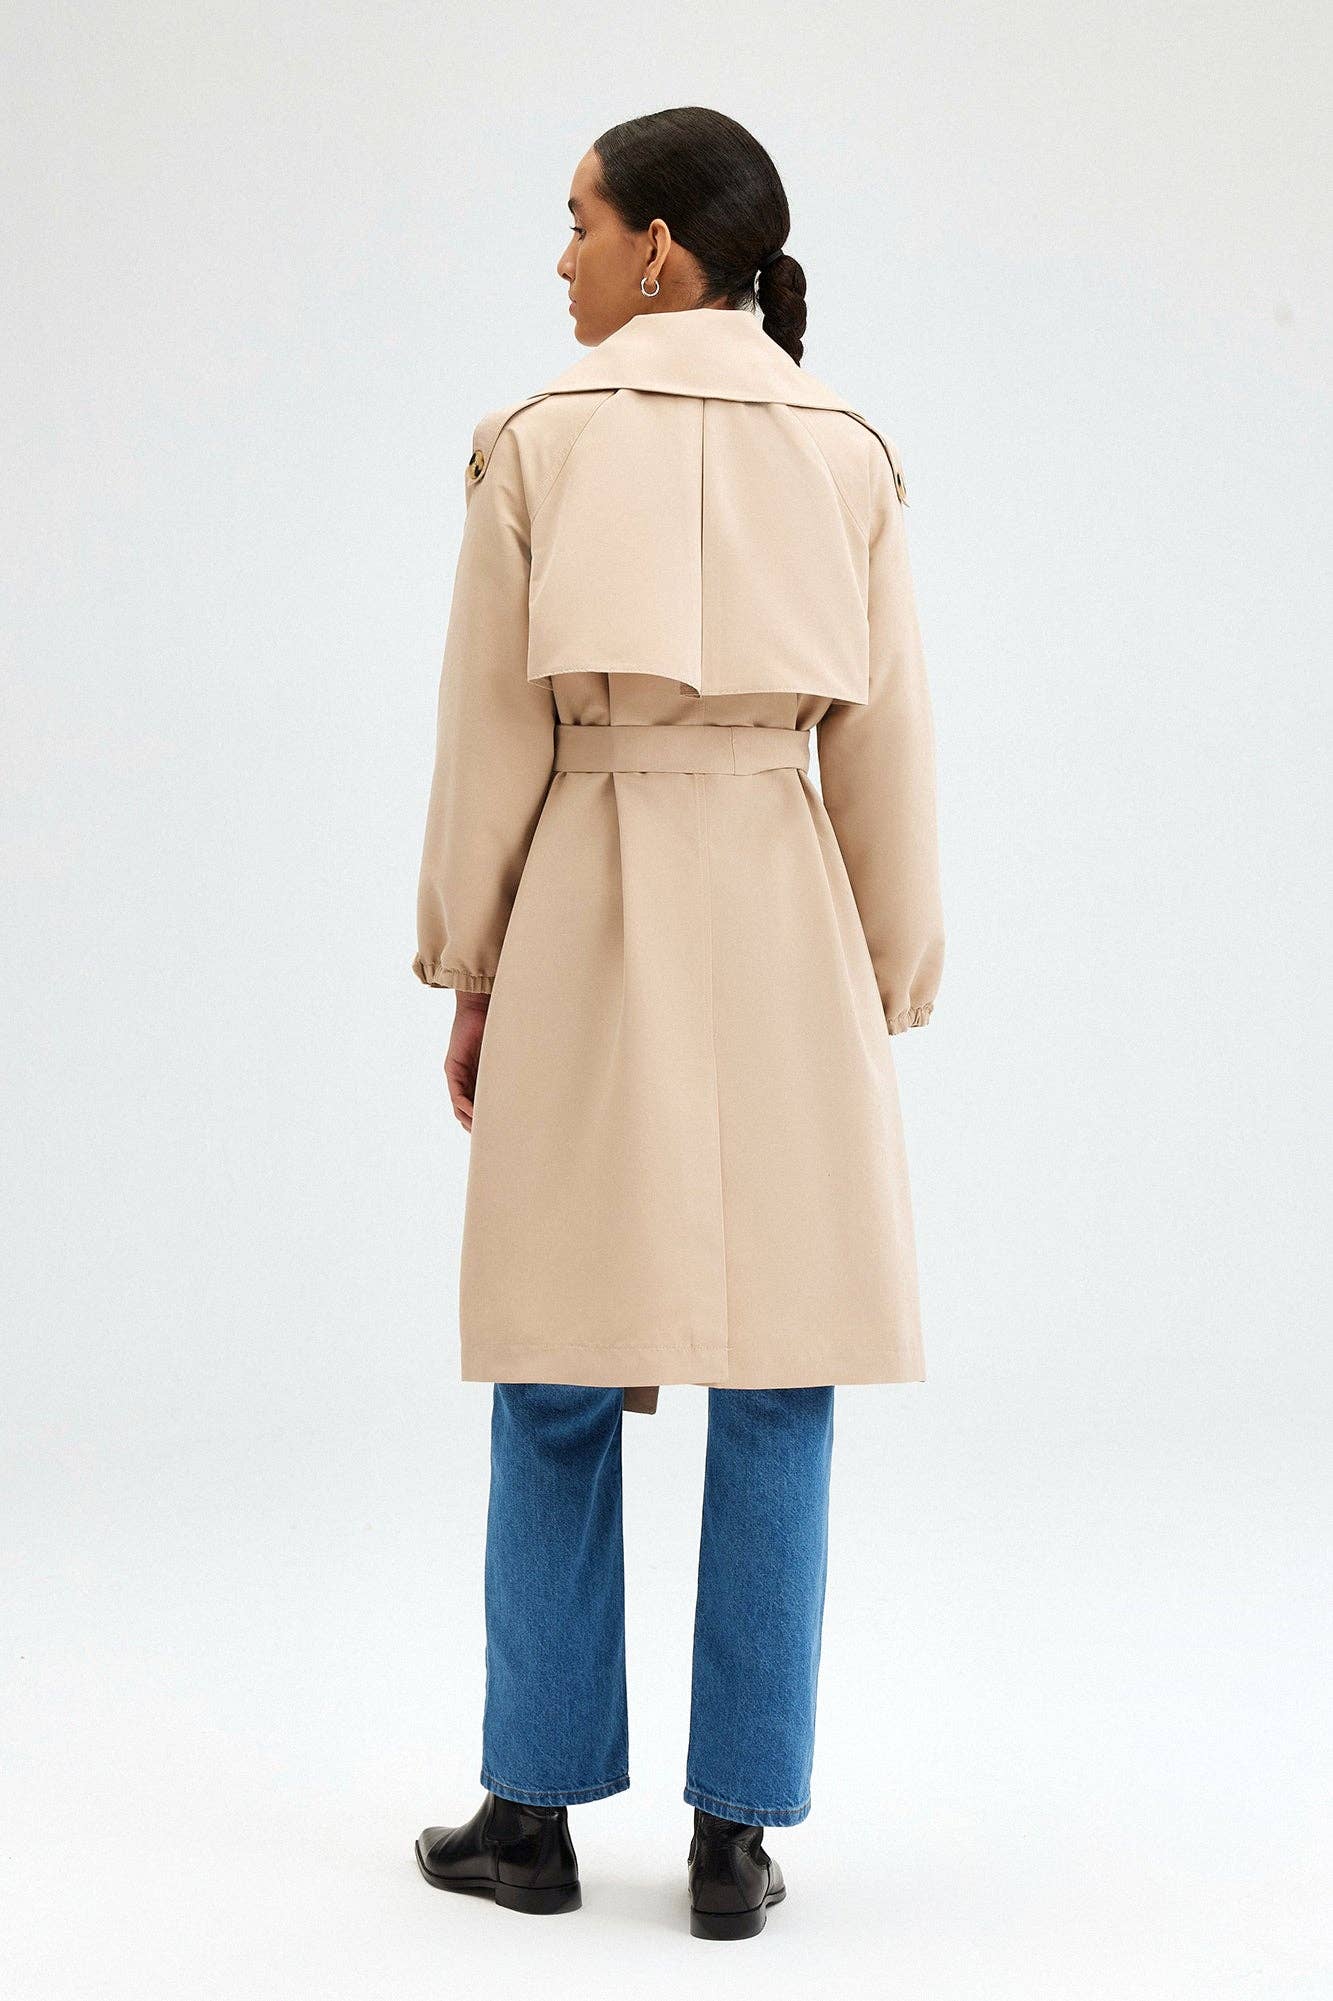 DOUBLE BREASTED TRENCH COAT: Stone / Standart 23F1X054 - Touché Prive